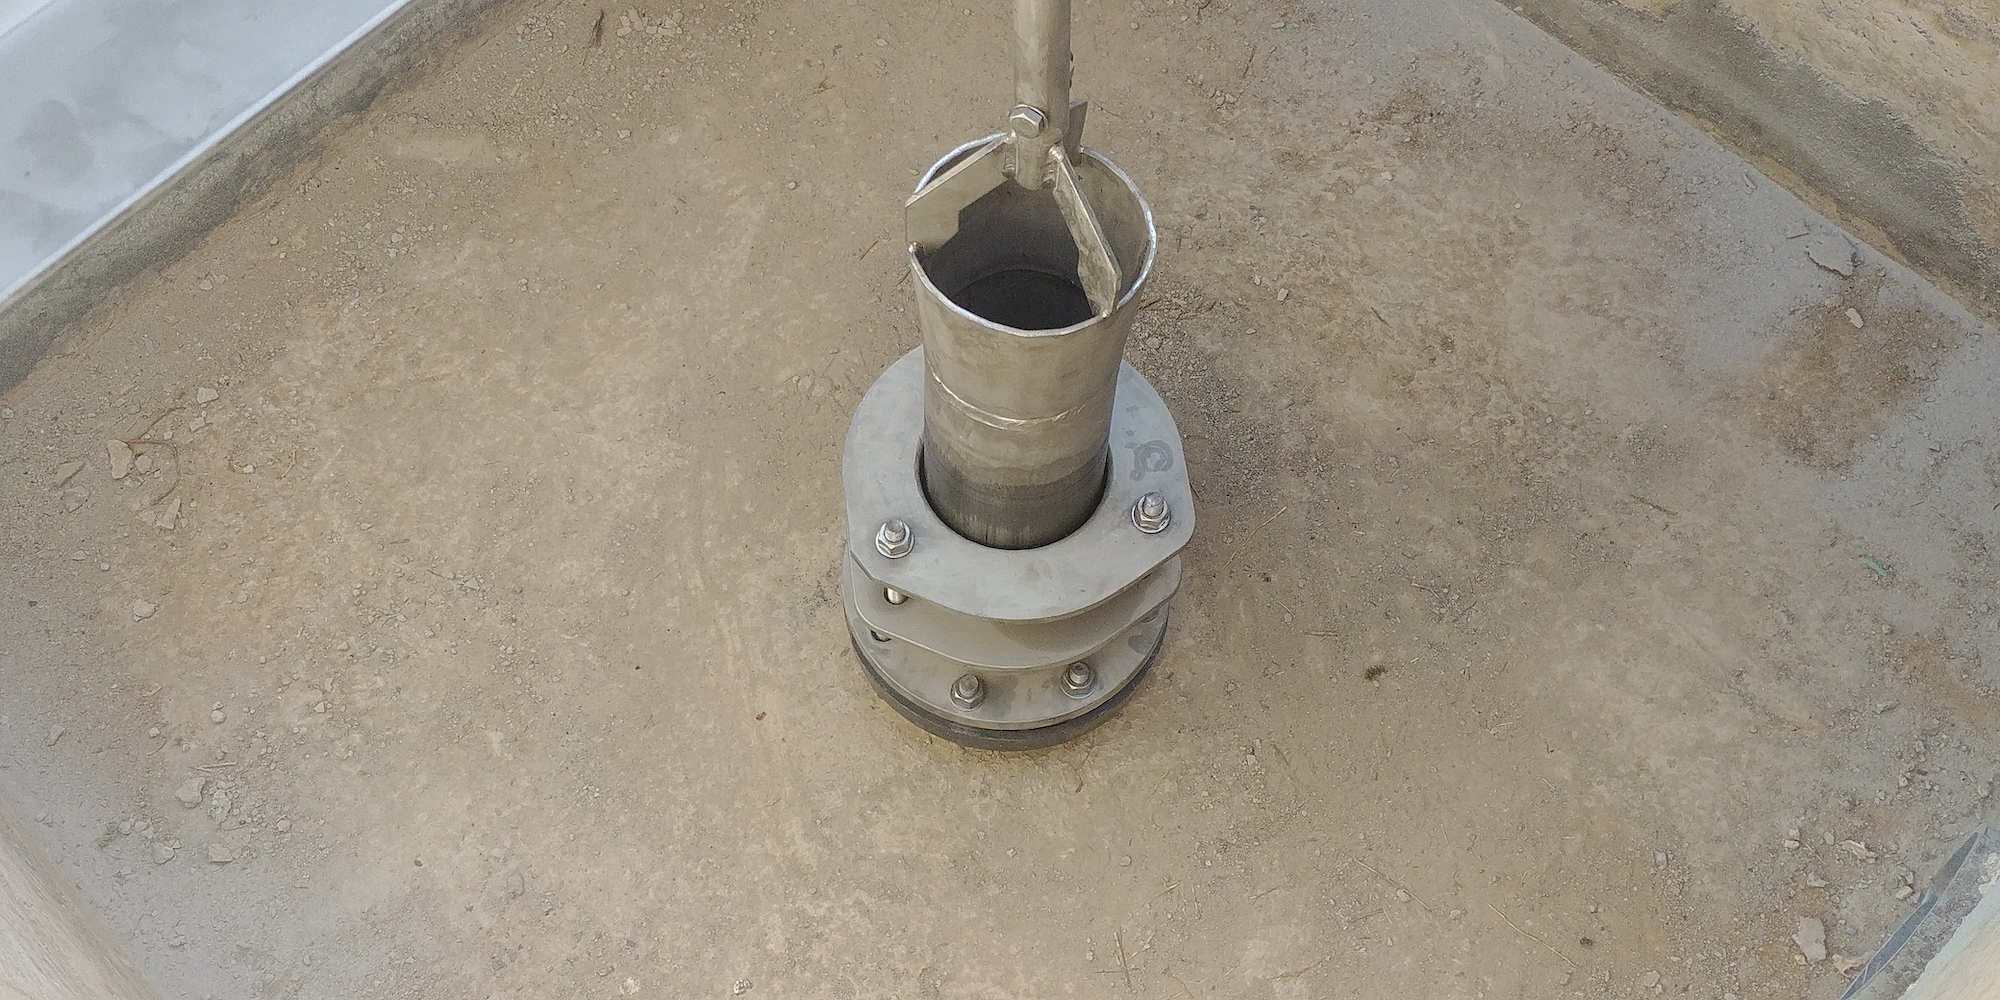 Telescopic Bellmouth Valve. Telescopic valve wastewater. Telescopic Bell-mouths are used in wastewater purification works to draw off surface fluids and scum.